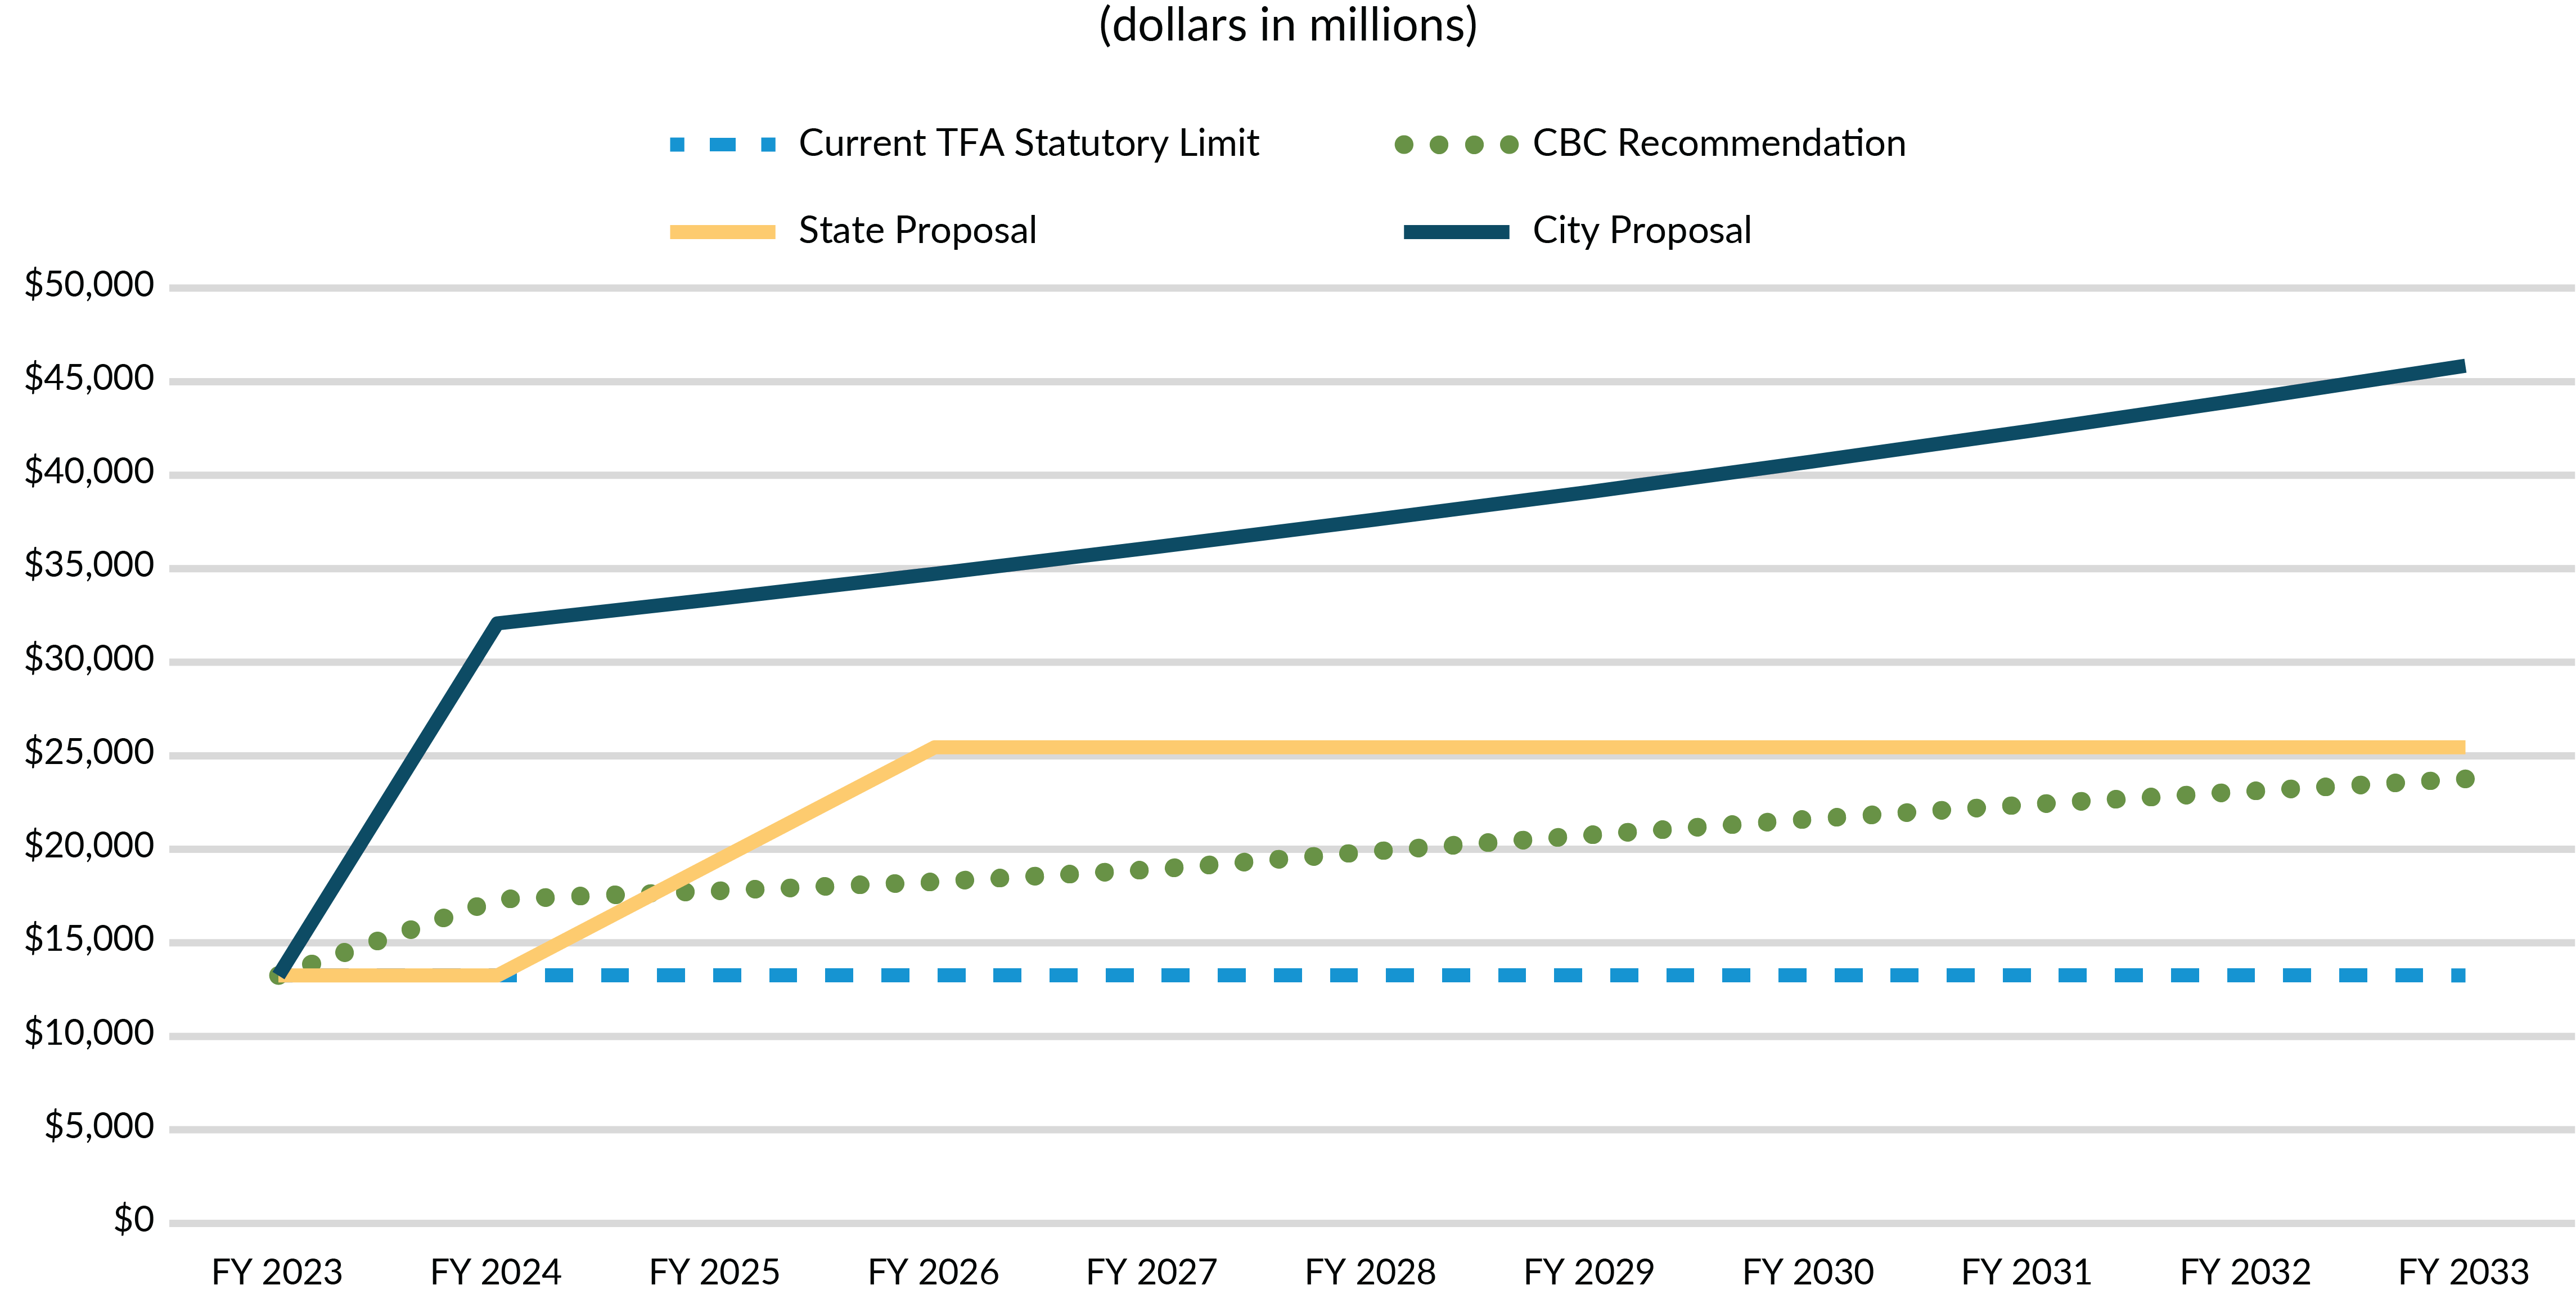 Figure 2: Projection of New TFA Statutory Capacity under Different Proposals, with Existing Limit